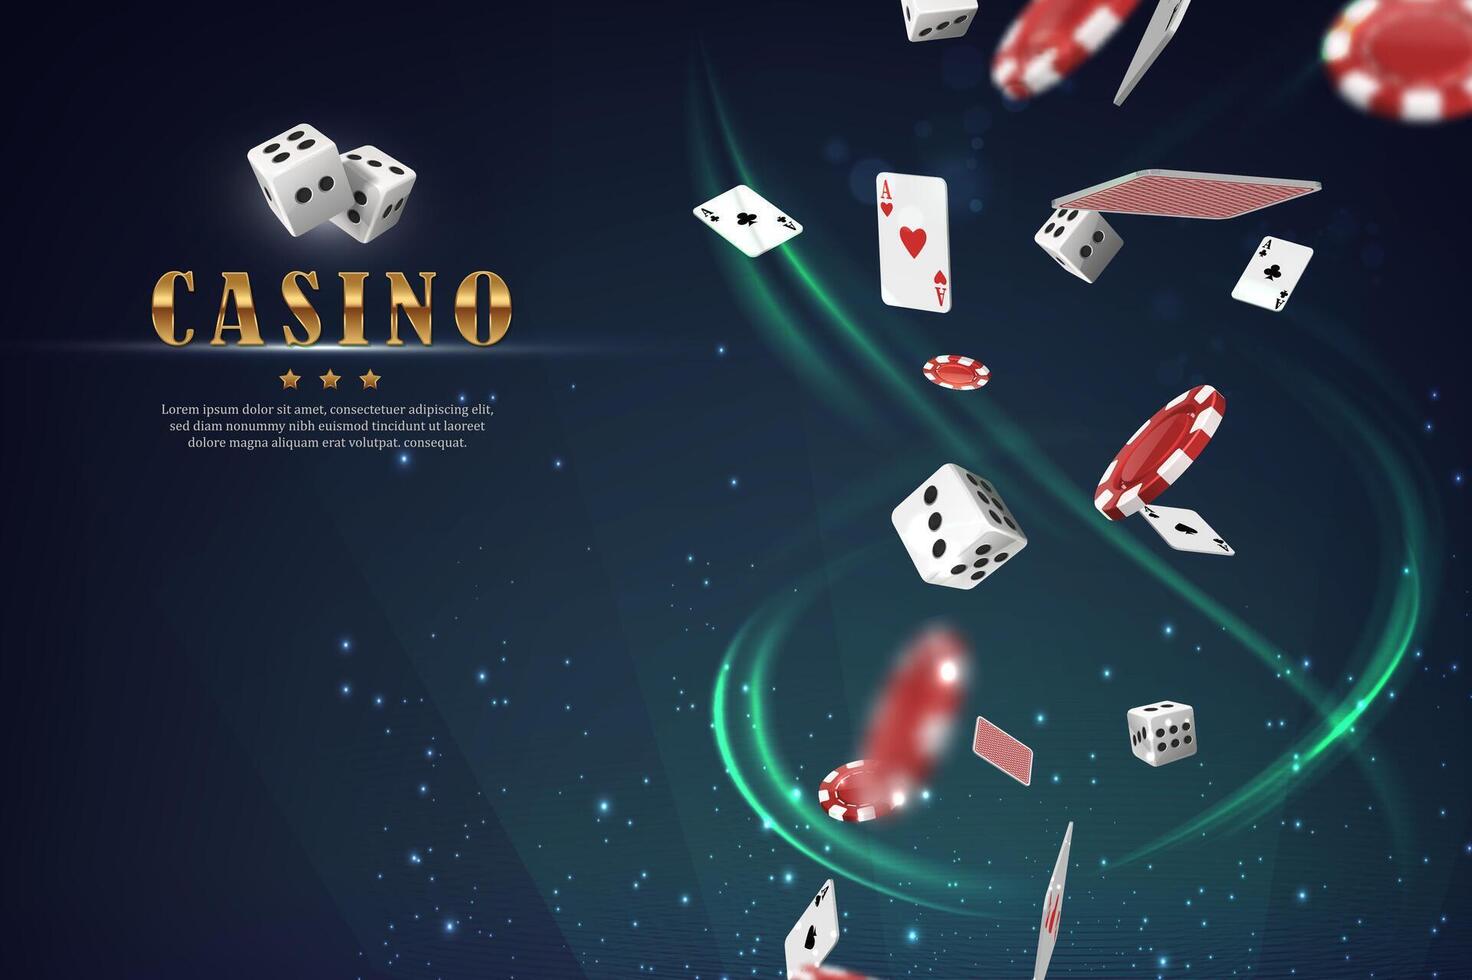 Online casino vector banner. On sci-fi green glowing background. with playing cards, chips and dice.